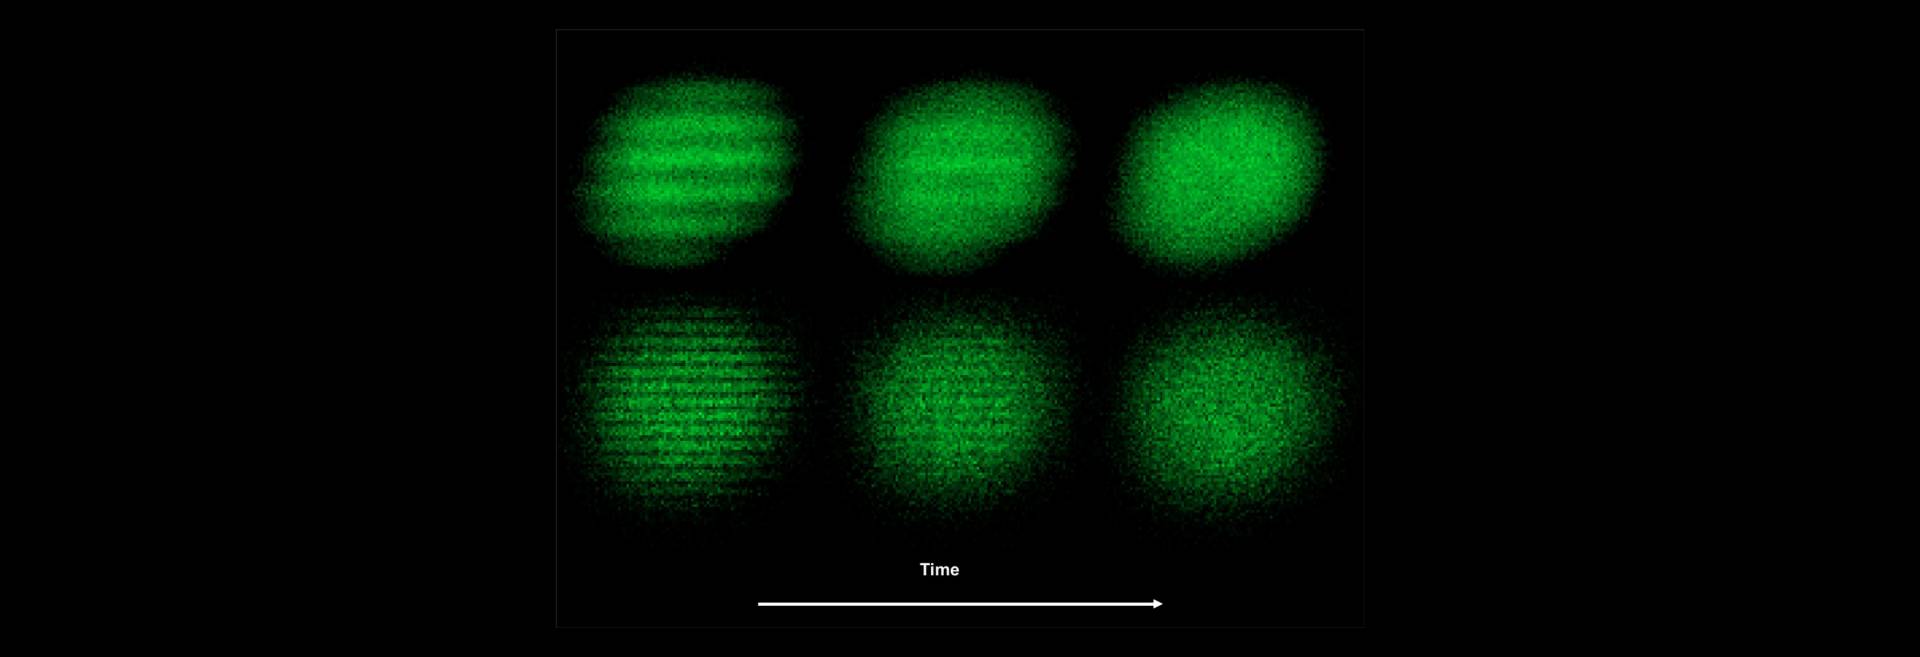 Green patterns of density waves through cold atoms